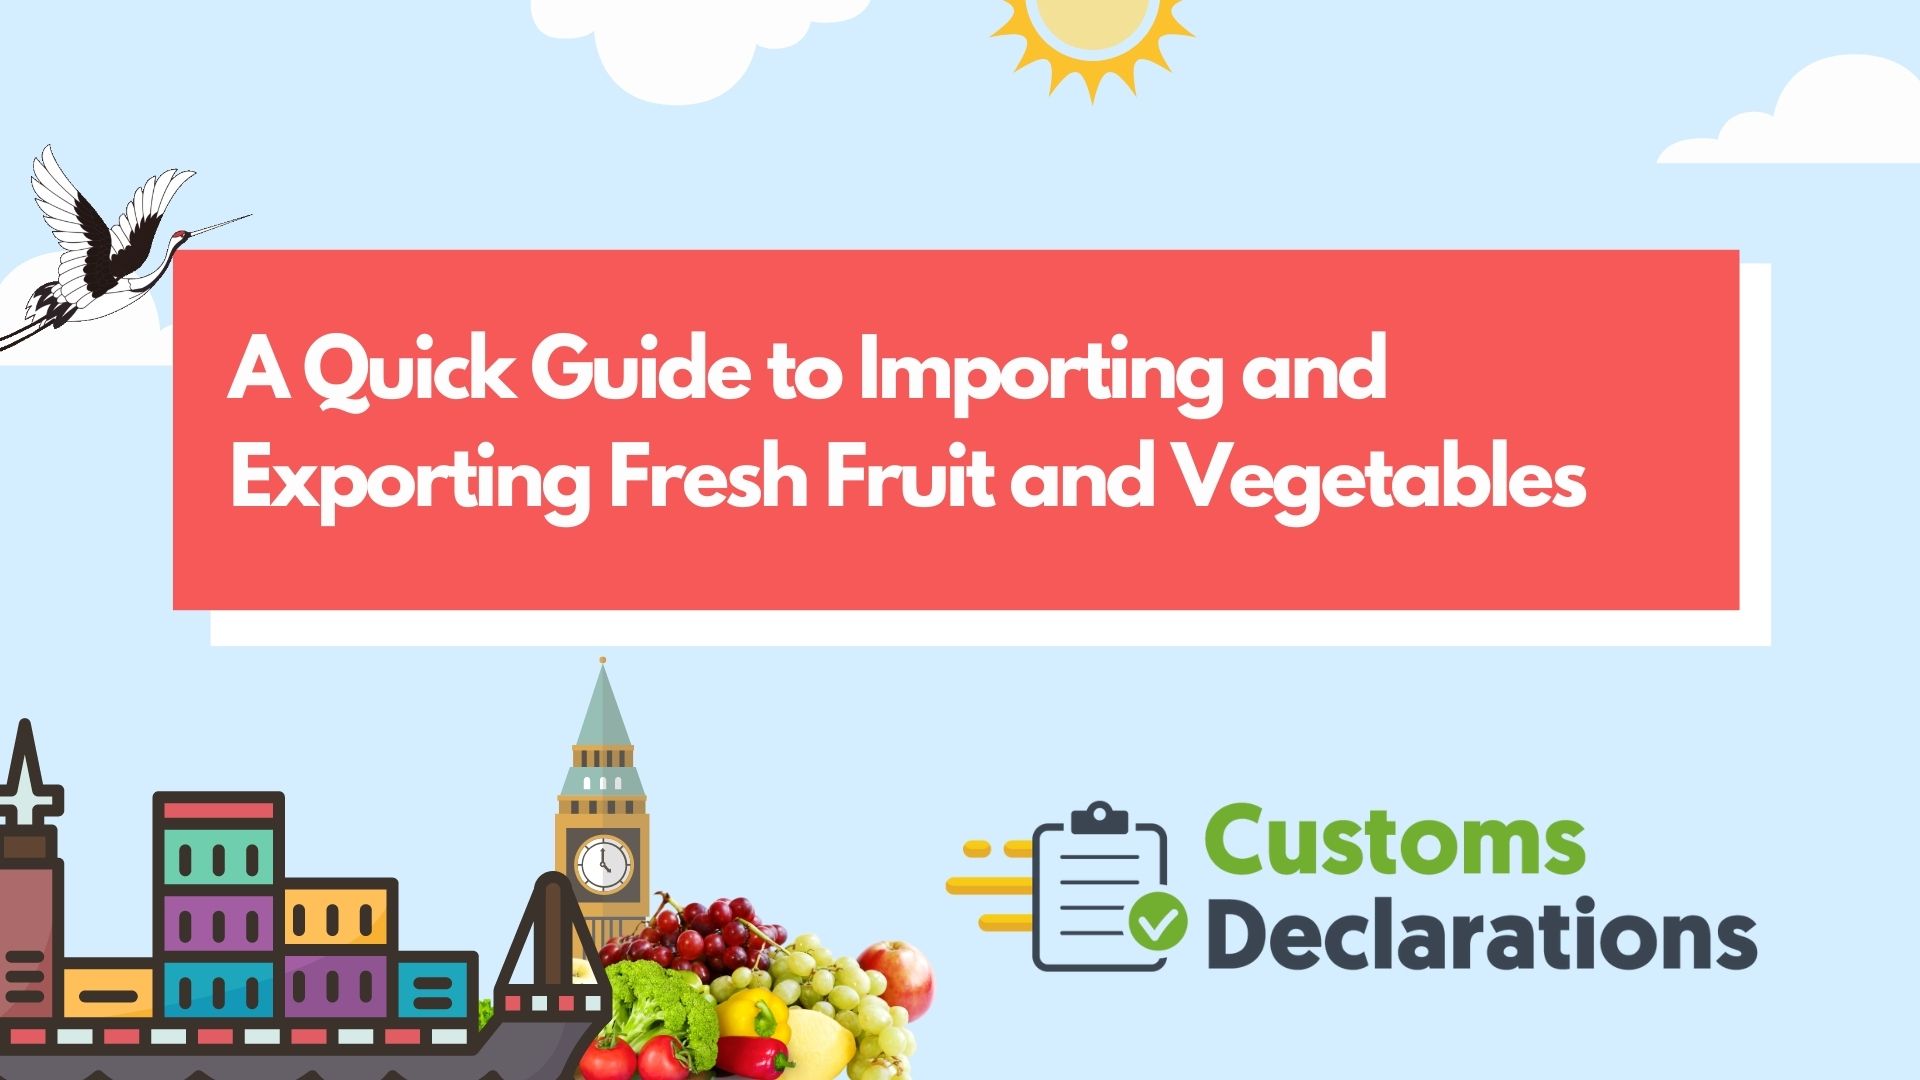 A Quick Guide to Importing and Exporting Fresh Fruit and Vegetables to, from and around the UK